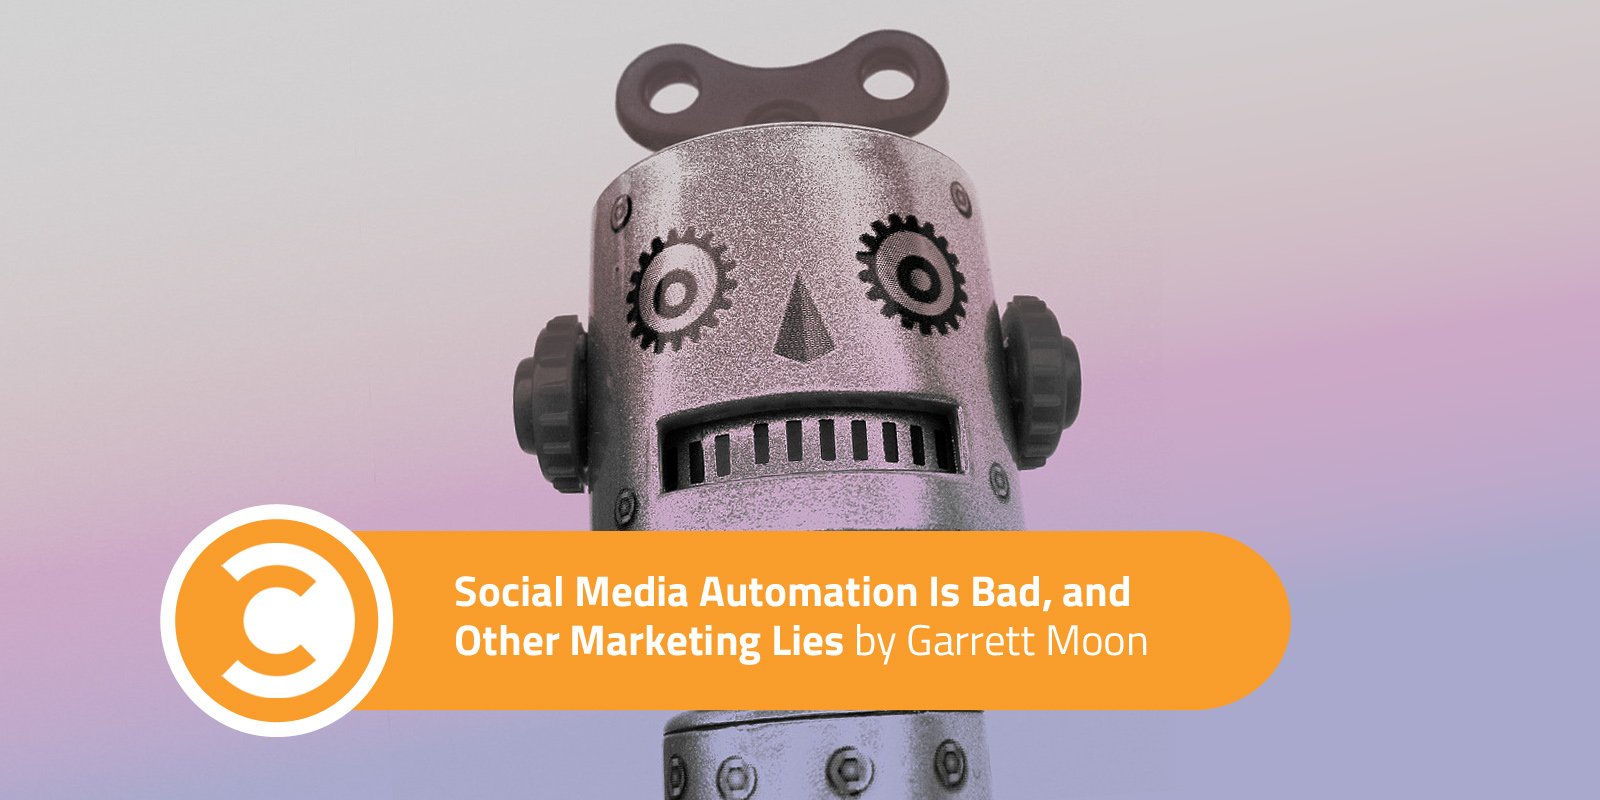 Social Media Automation Is Bad, and Other Marketing Lies